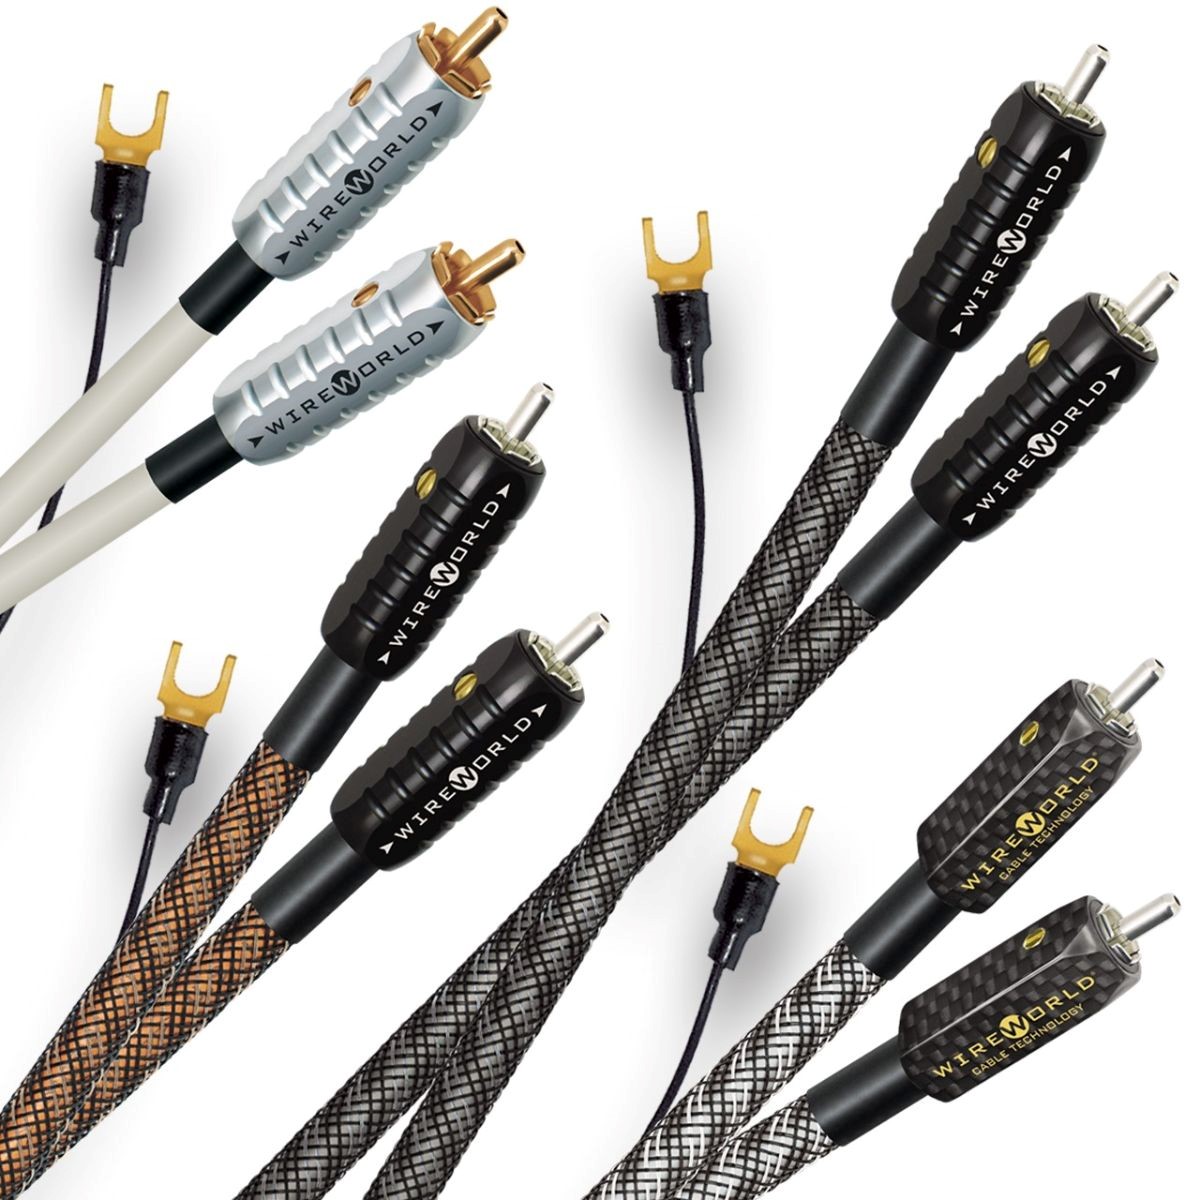 Wireworld Tonearm cables now with RCA Plugs